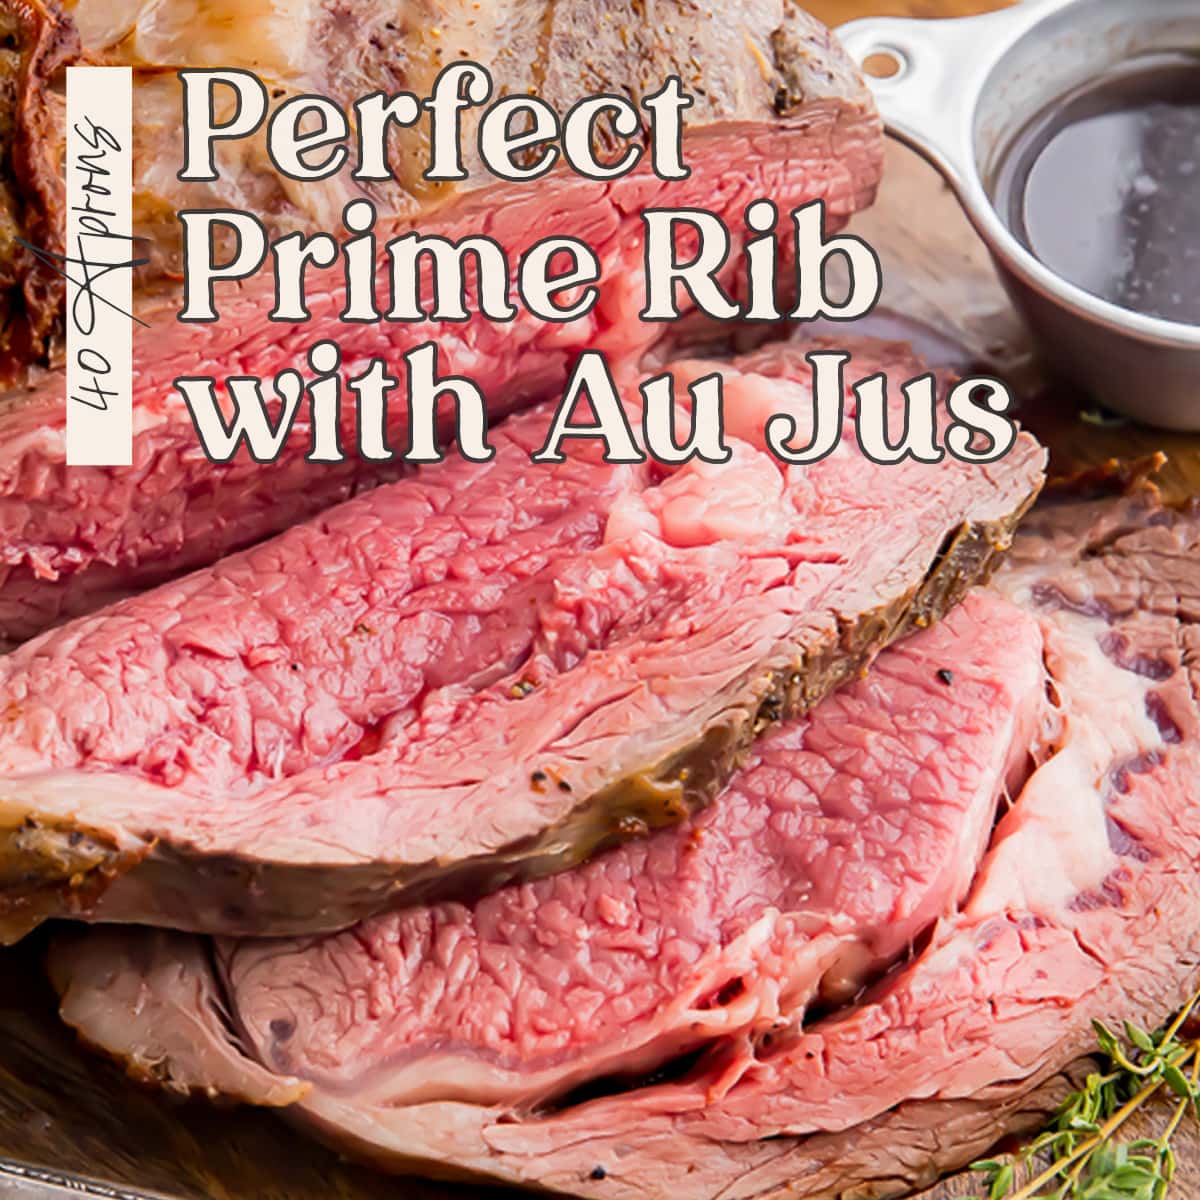 Pin graphic for prime rib with au jus.